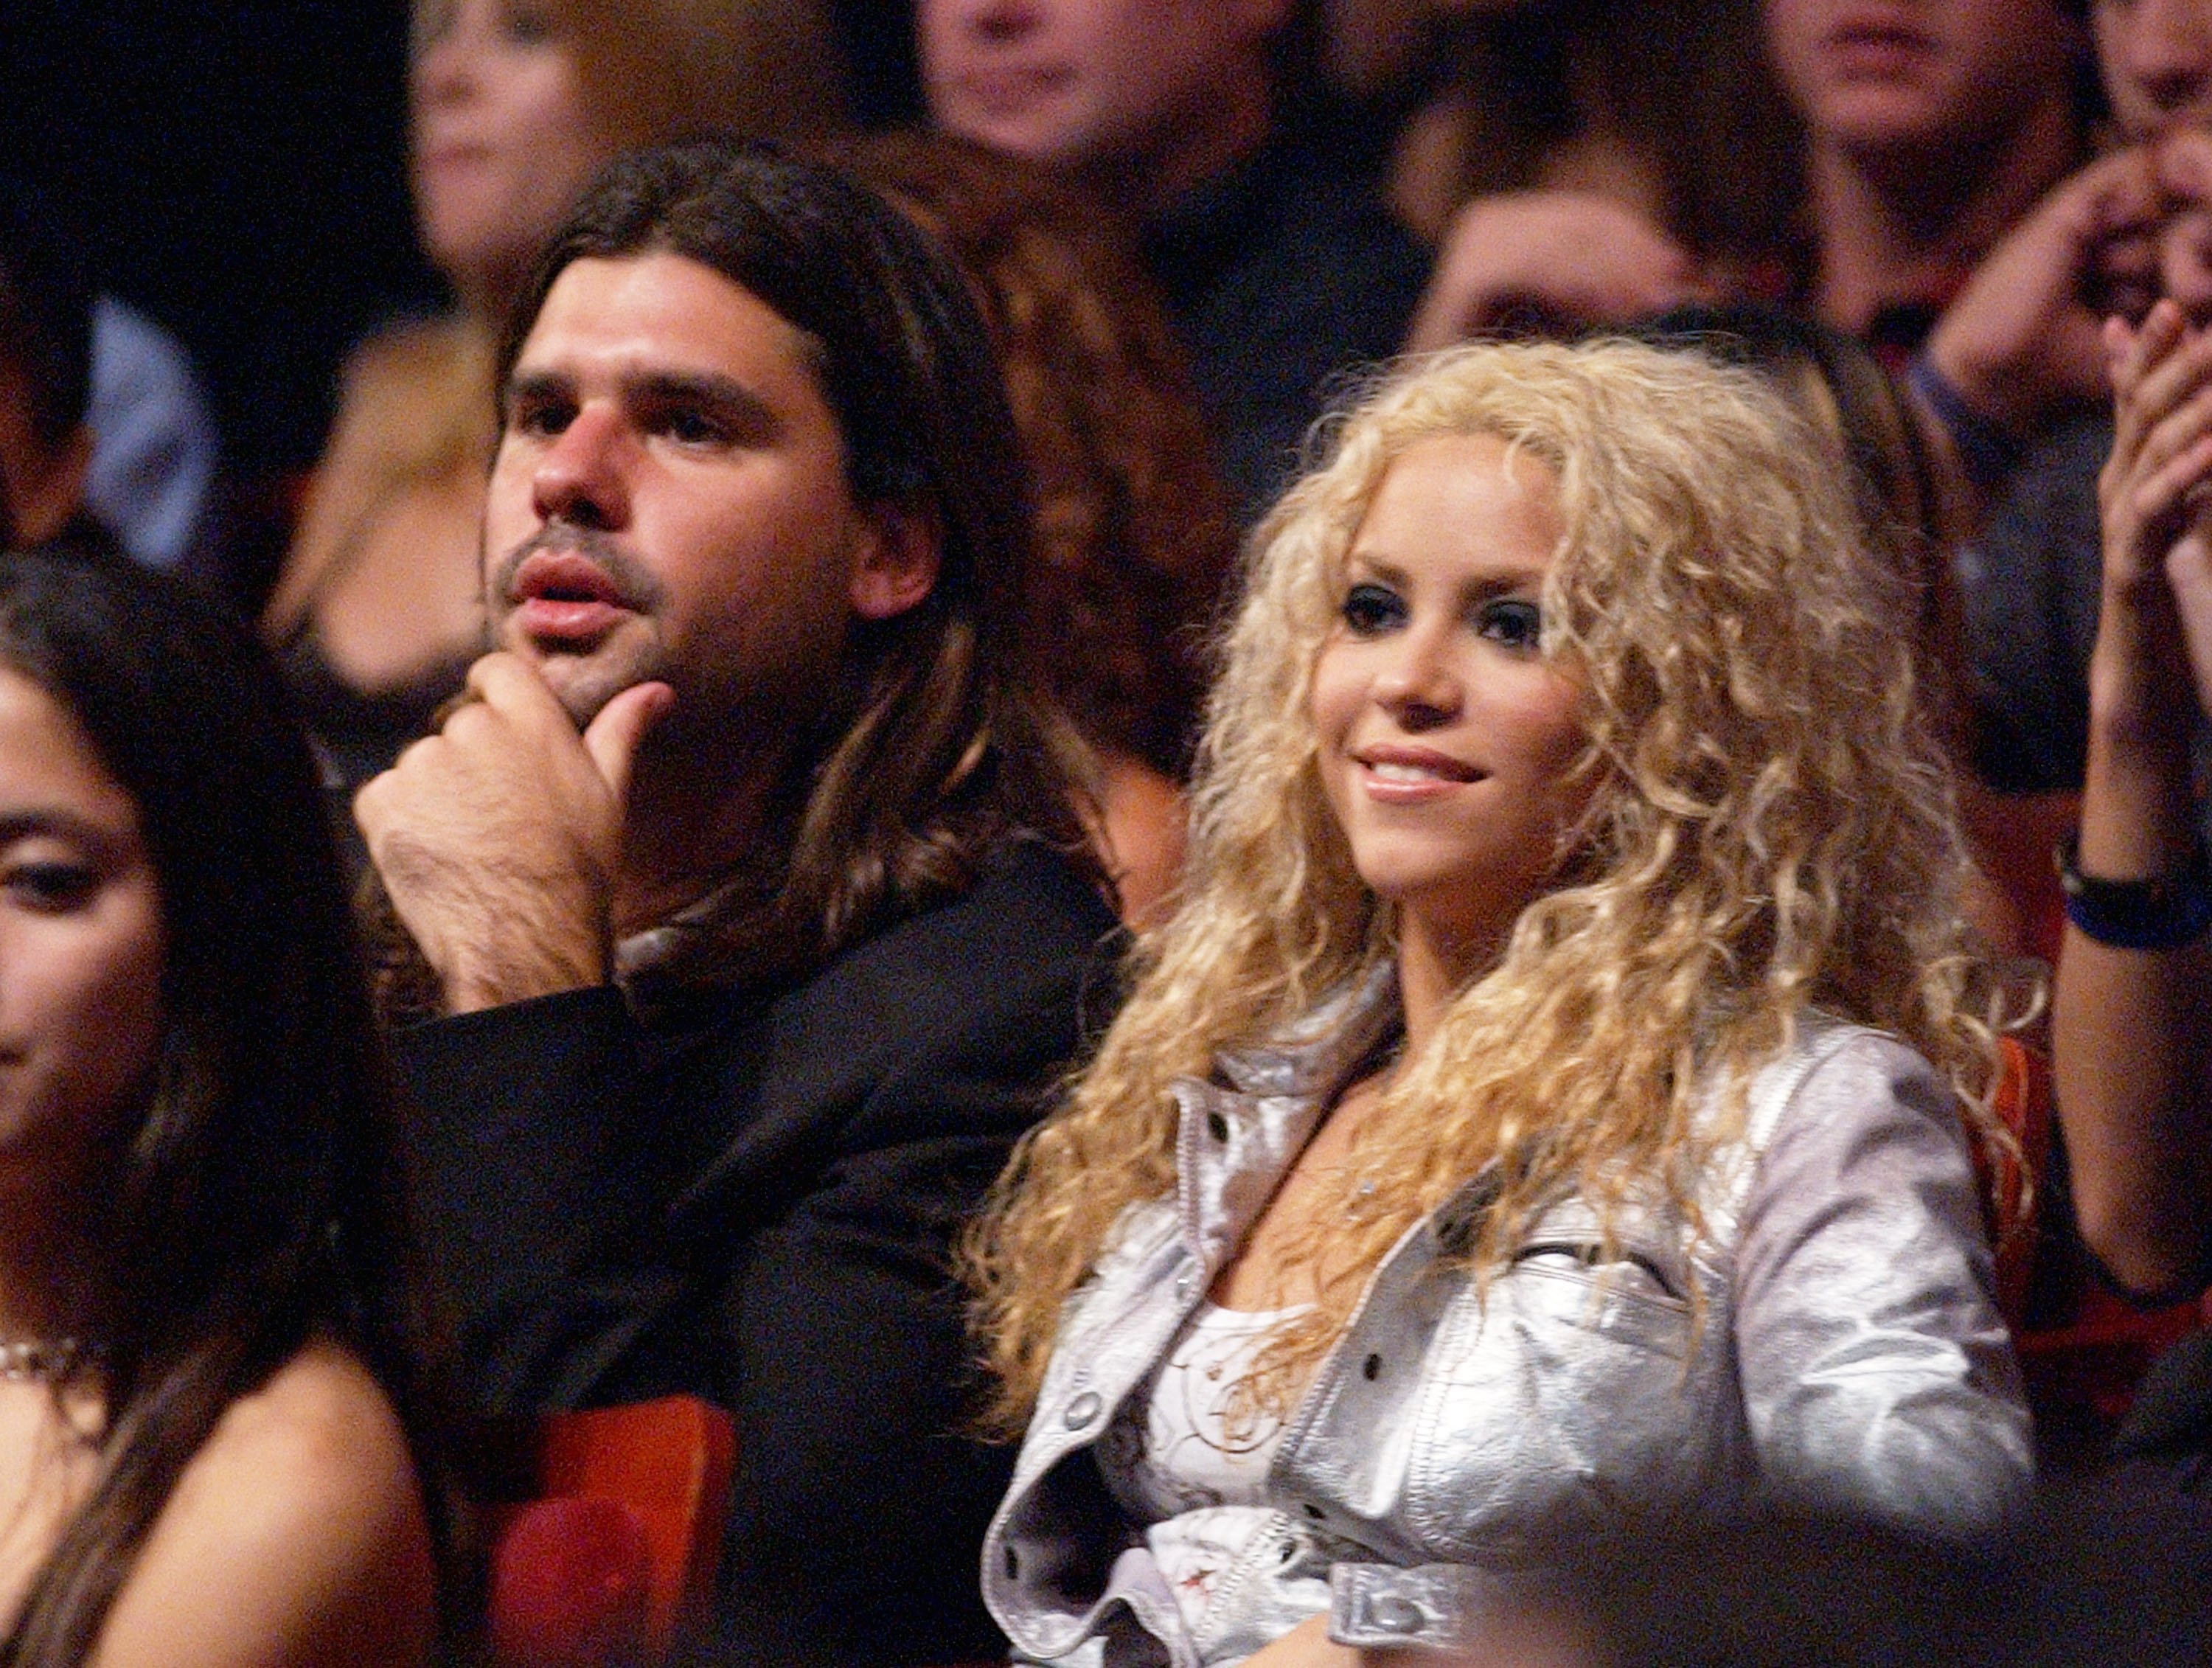 Shakira and Antonio De La Rua at the first Music Video Music Awards Latinoamérica, which took place on October 24, 2002, at the Jackie Gleason Theater in Miami, FL | Source: Getty Images